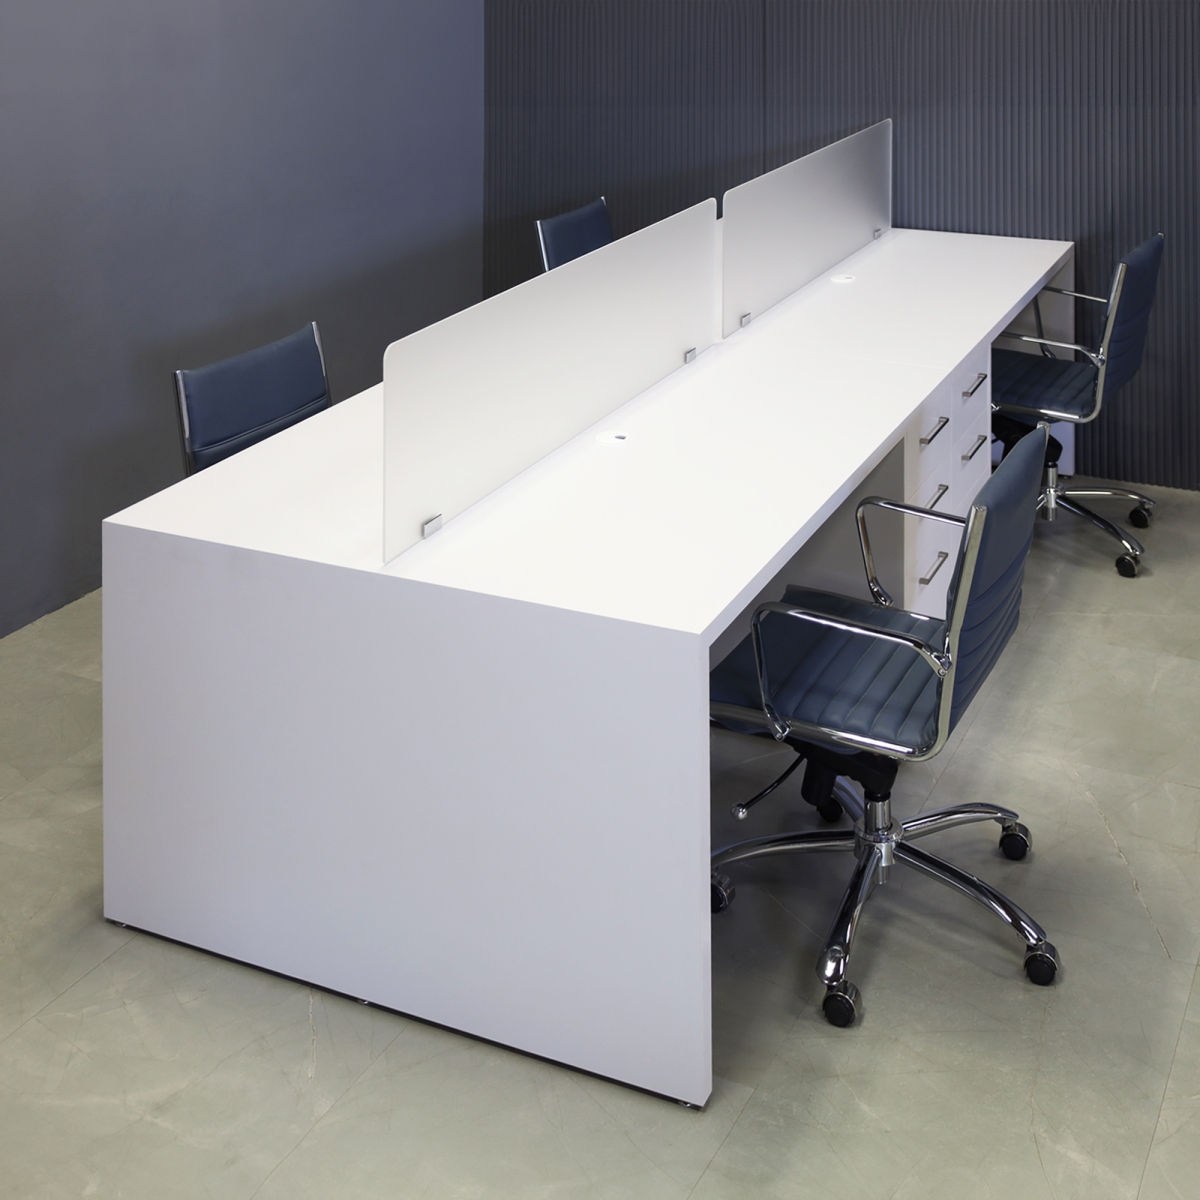 aXis Workstation in White Gloss Laminate - 120 In. - Stock #6